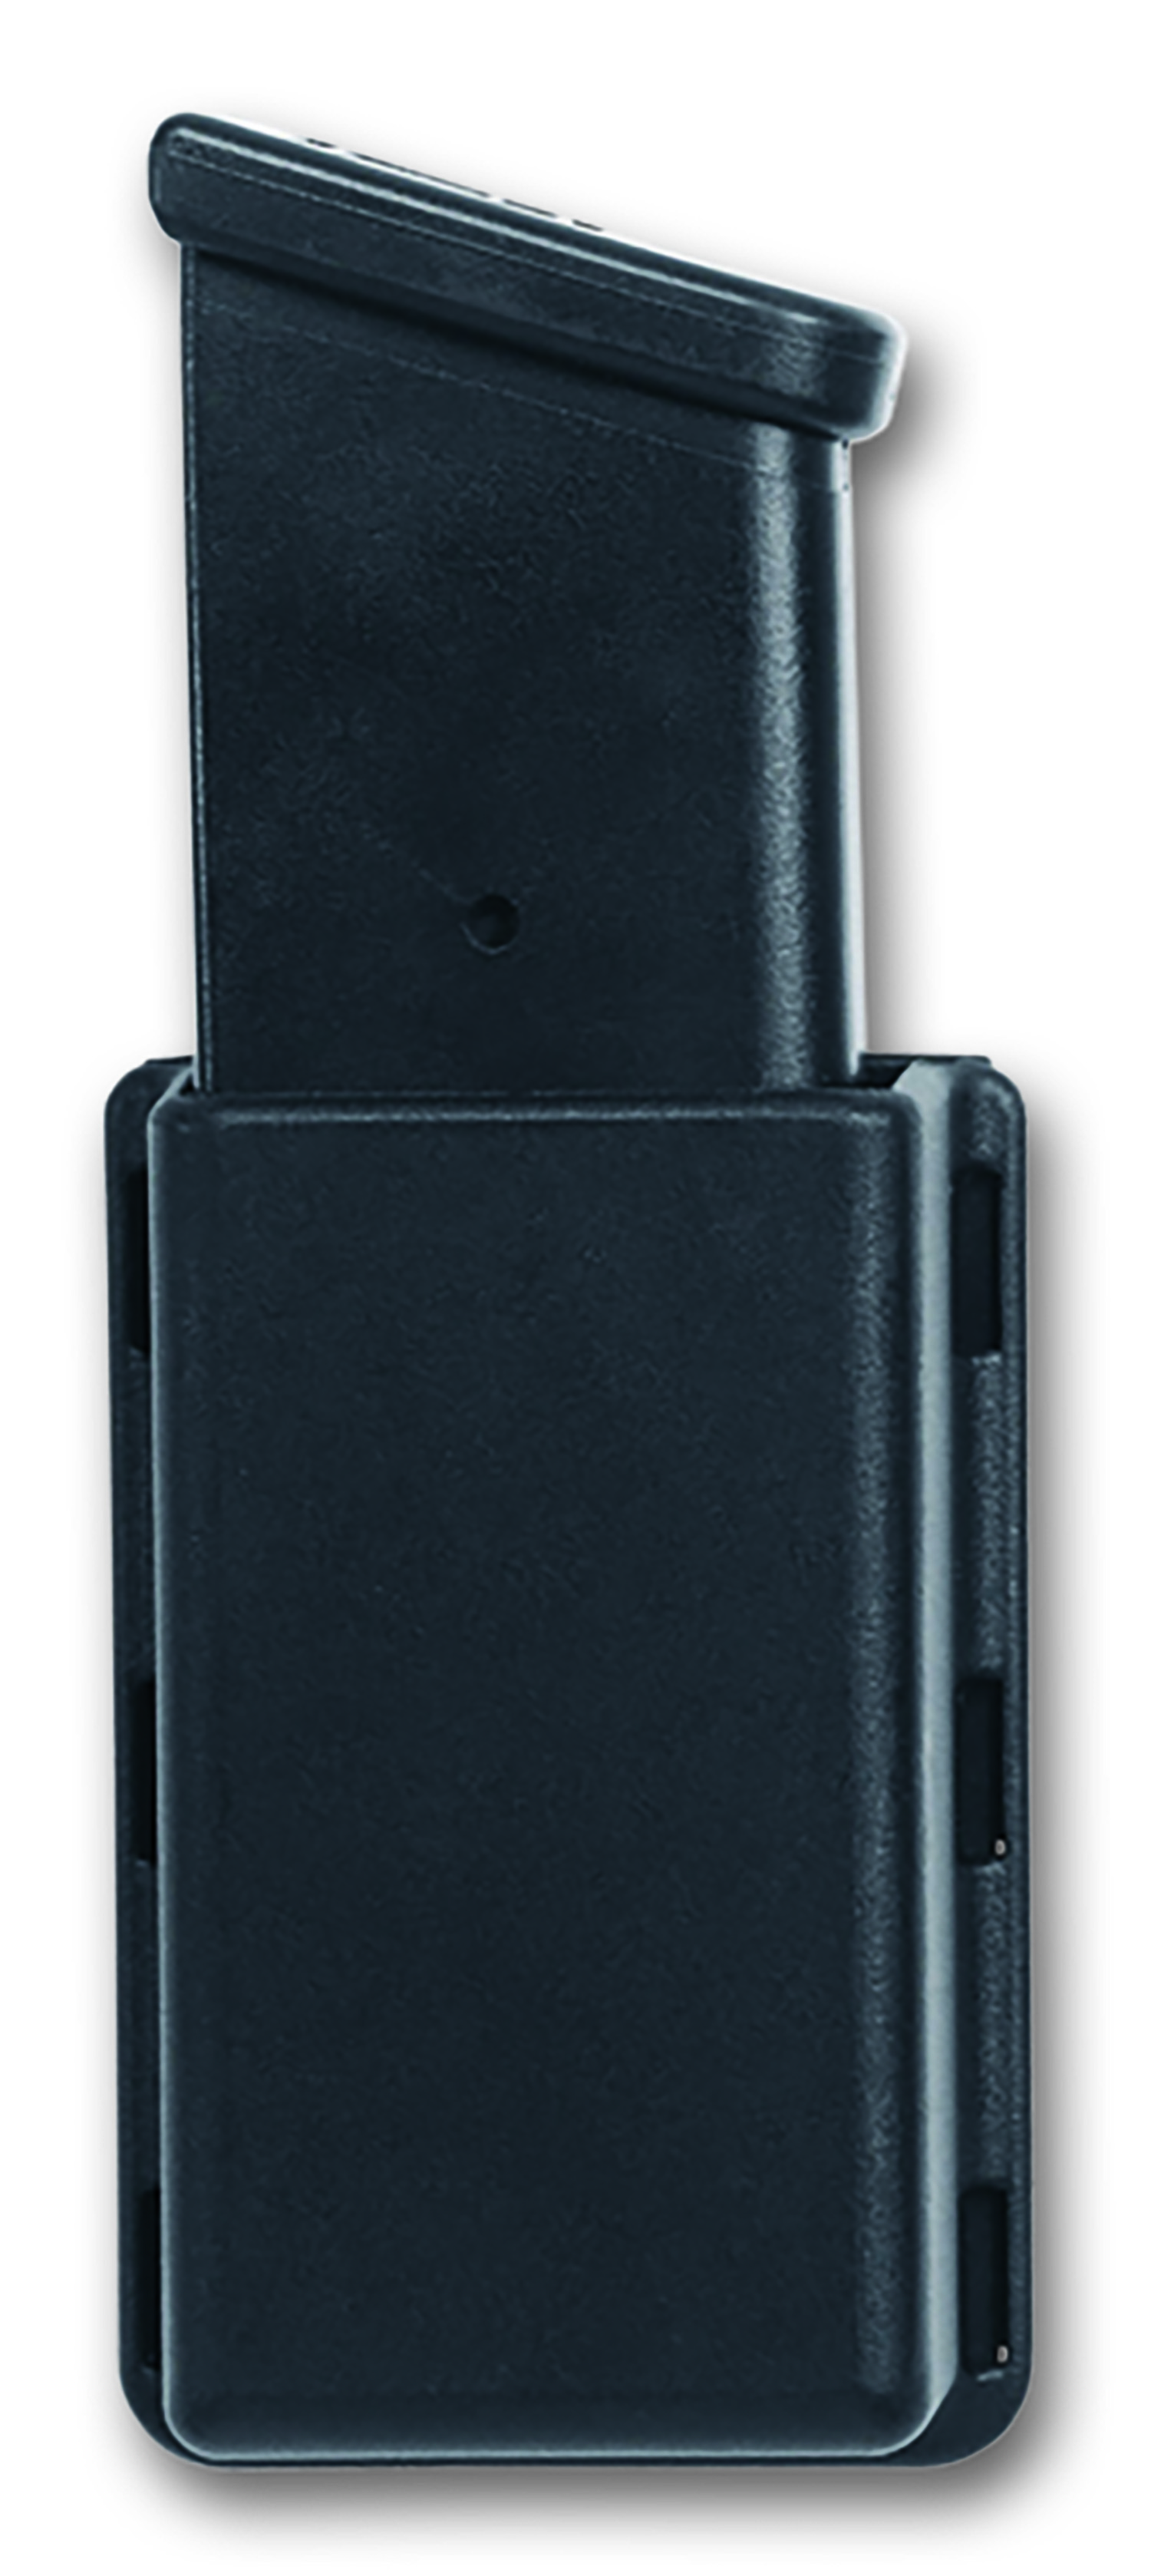 Uncle Mikes 50362 Kydex Single Mag Case Black Kydex 9mm,40 Cal